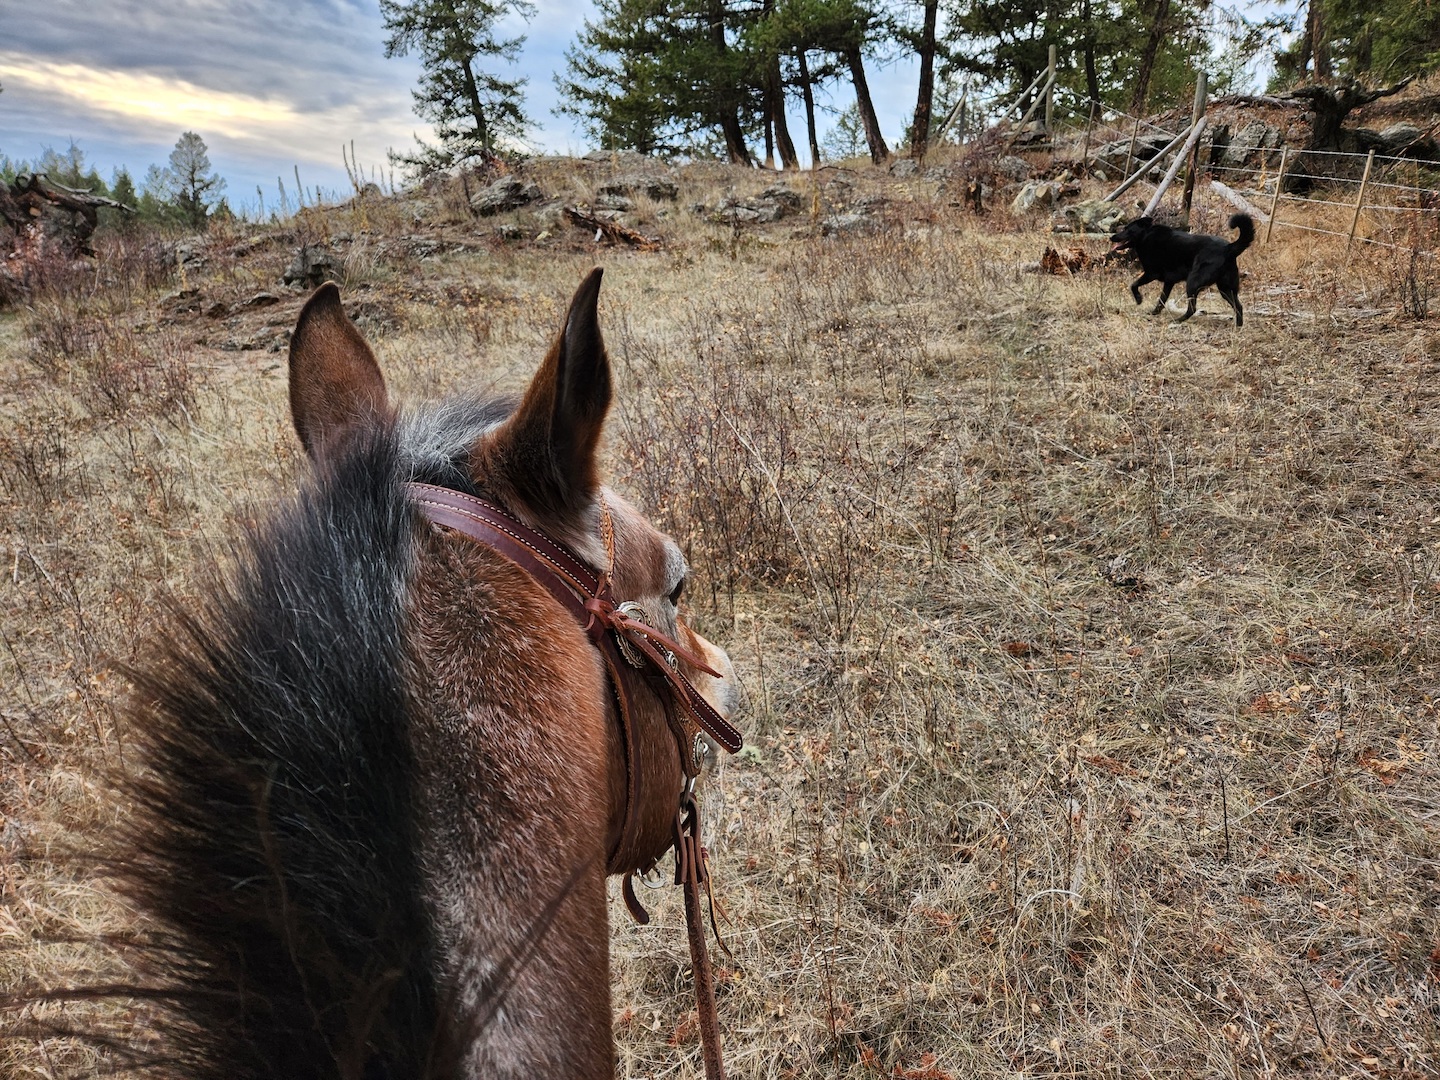 photo taken from horseback, looking through an appaloosa's ears at a late-fall field with a black dog running along